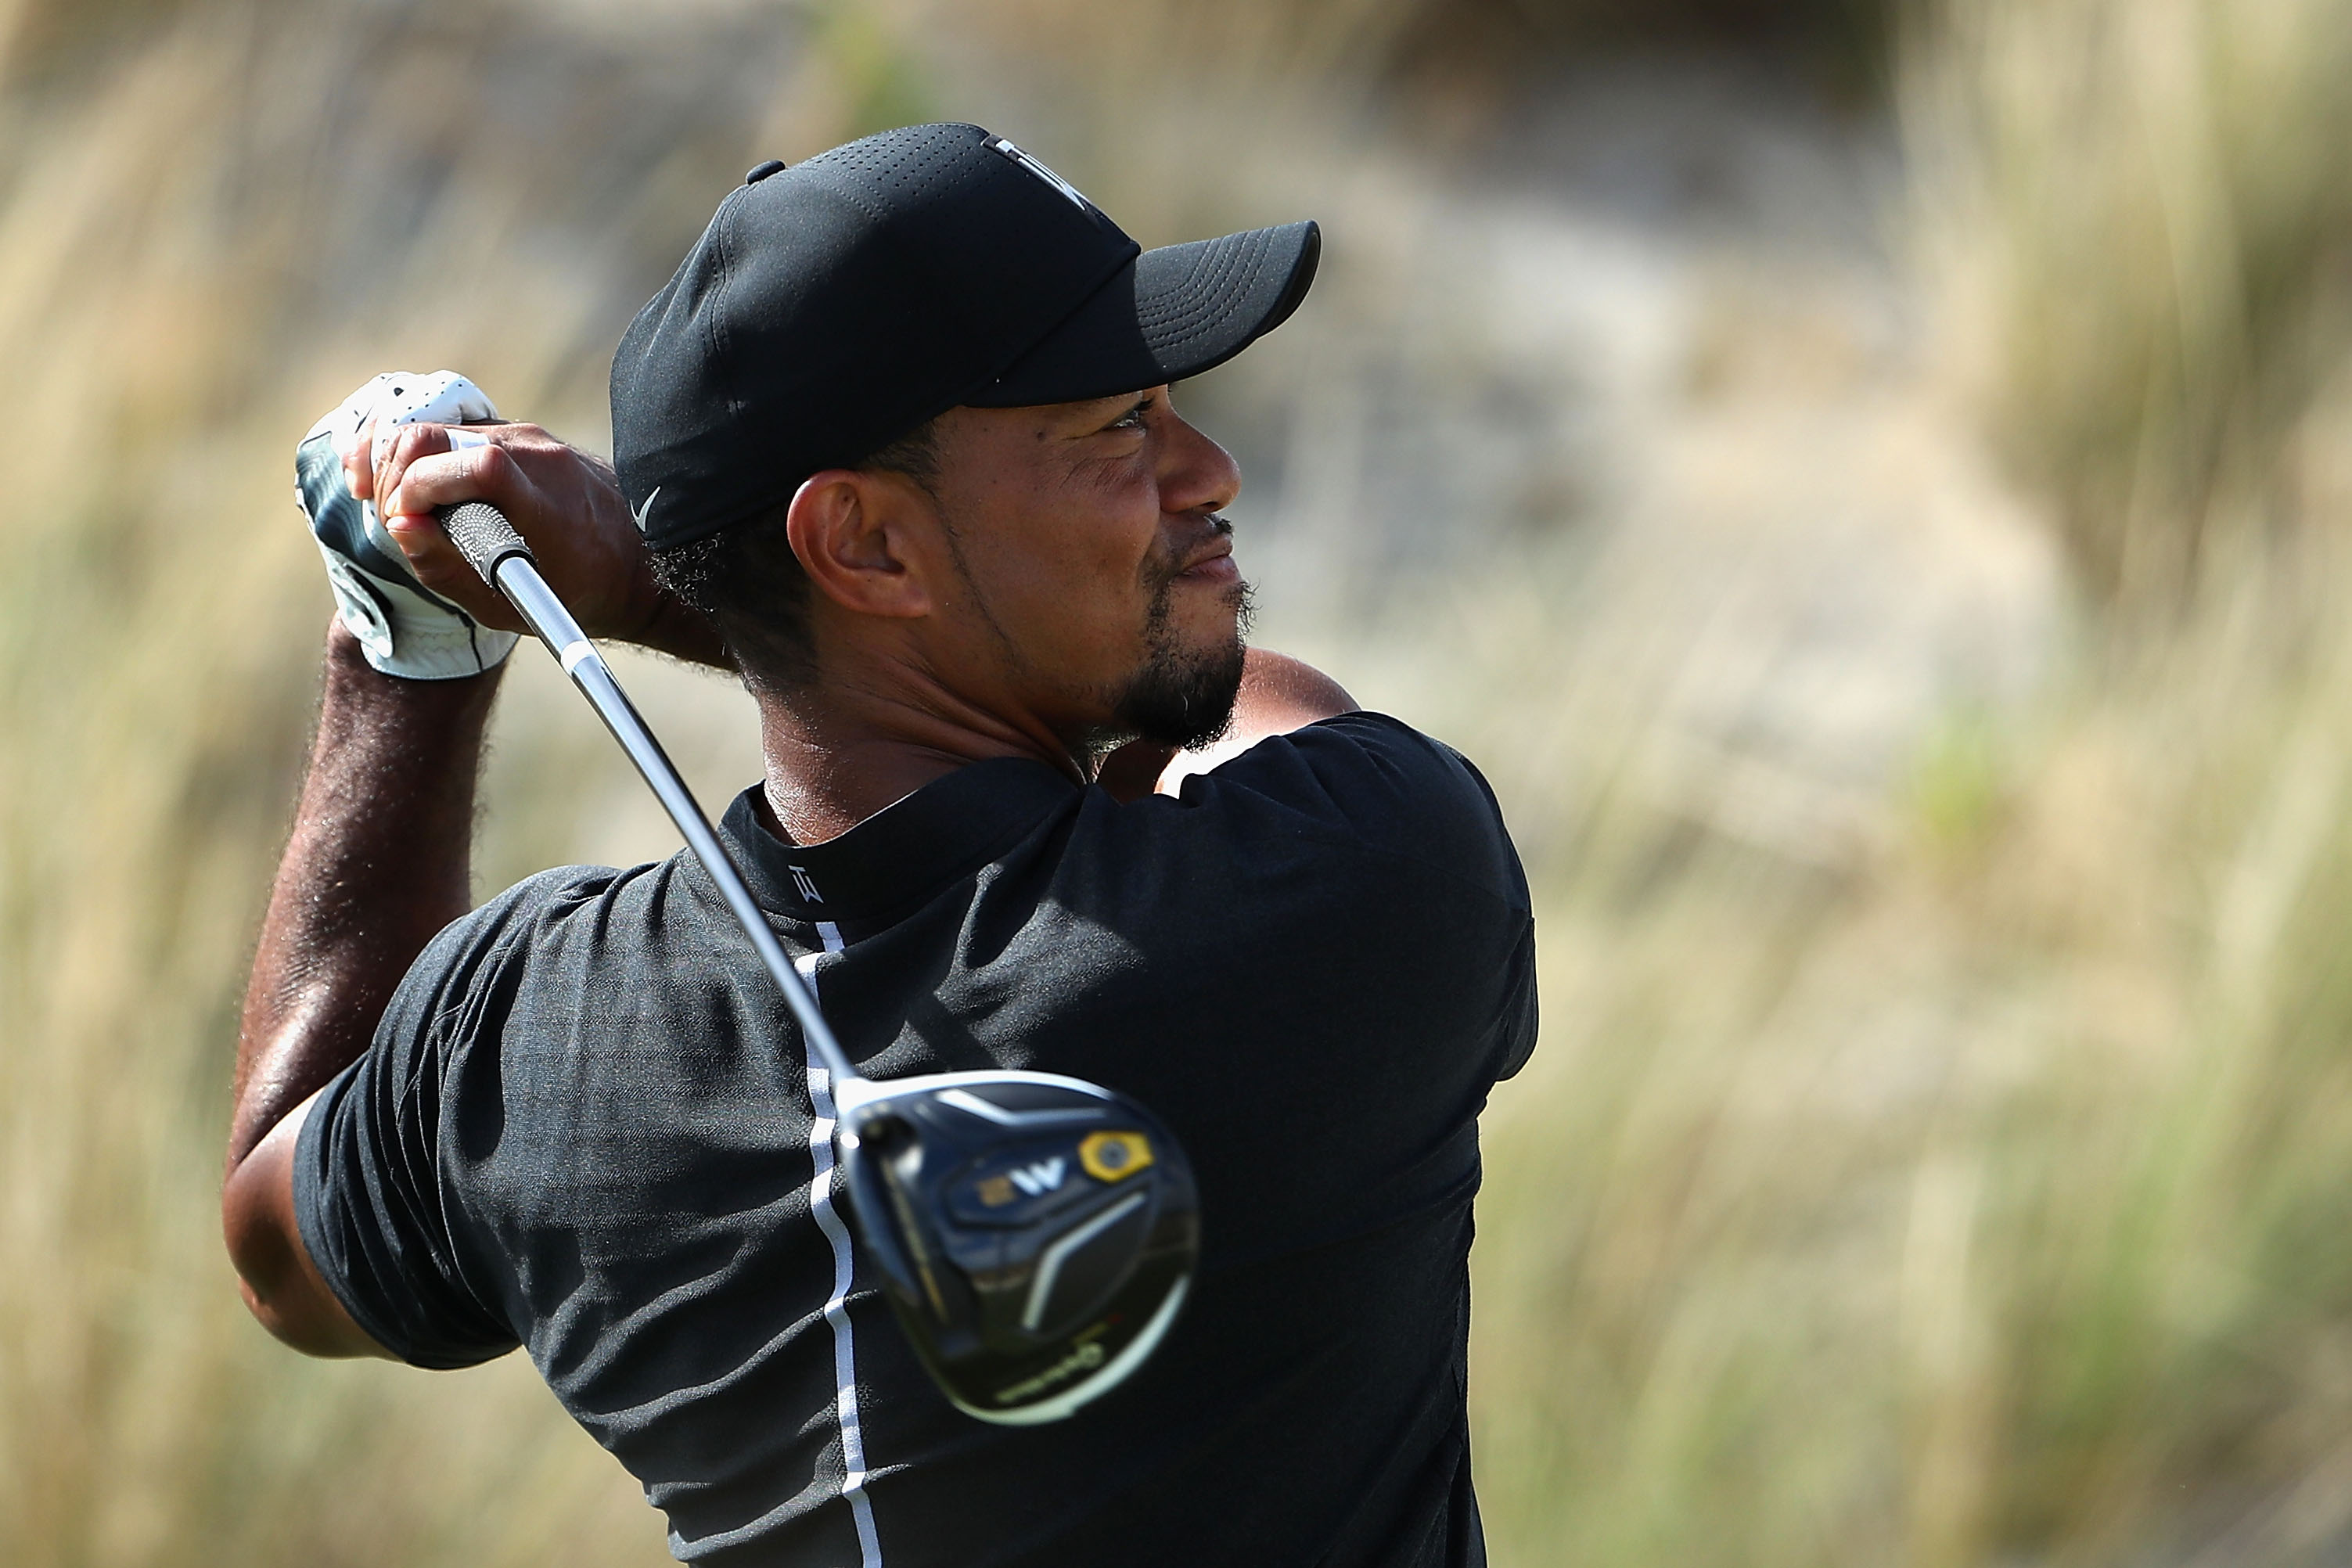 Tiger Woods Watch Live updates from Day 1 at the Hero World Challenge This is the Loop Golf Digest